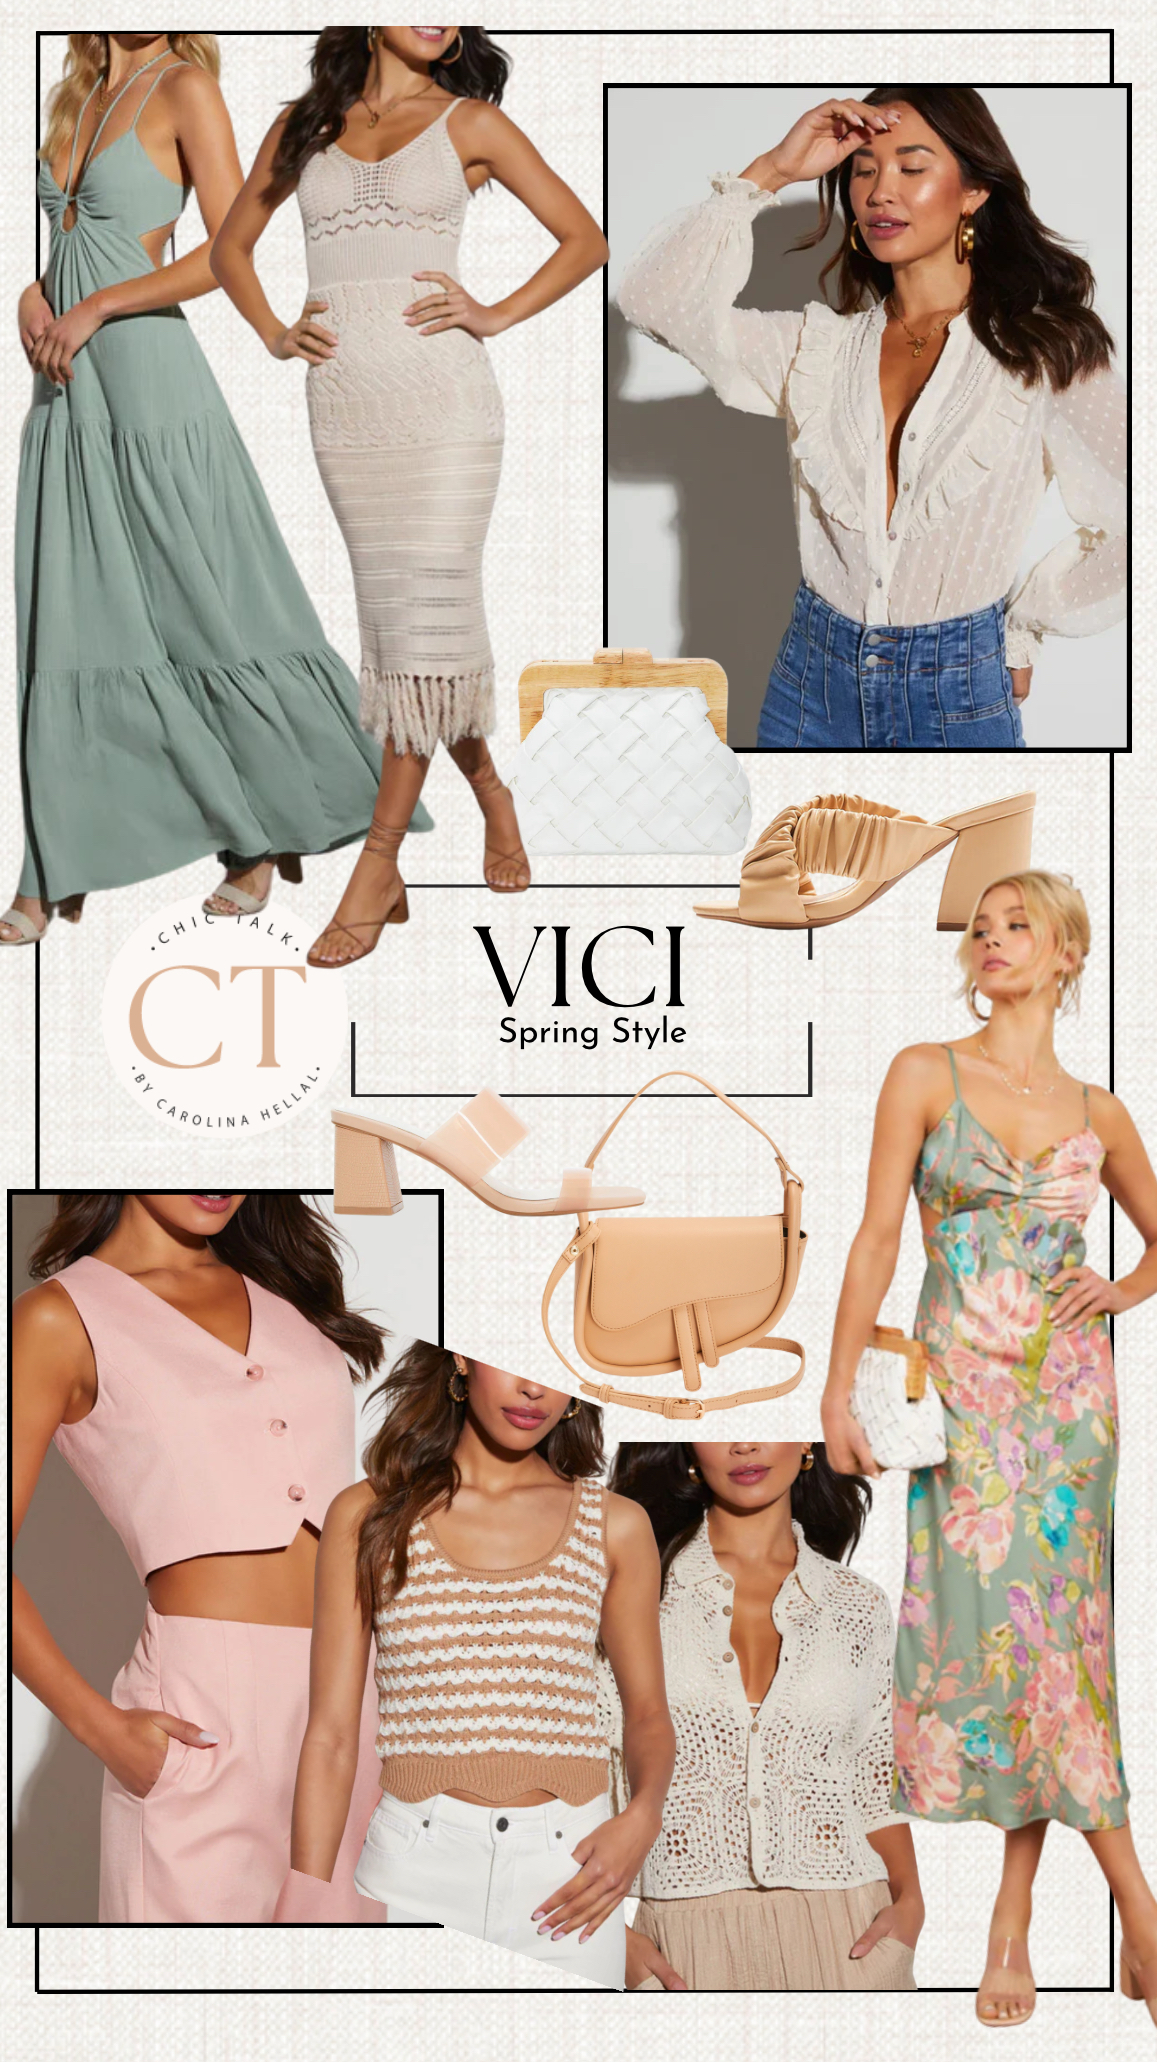 SPRING STYLE VIA VICI COLLECTION - CHIC TALK 